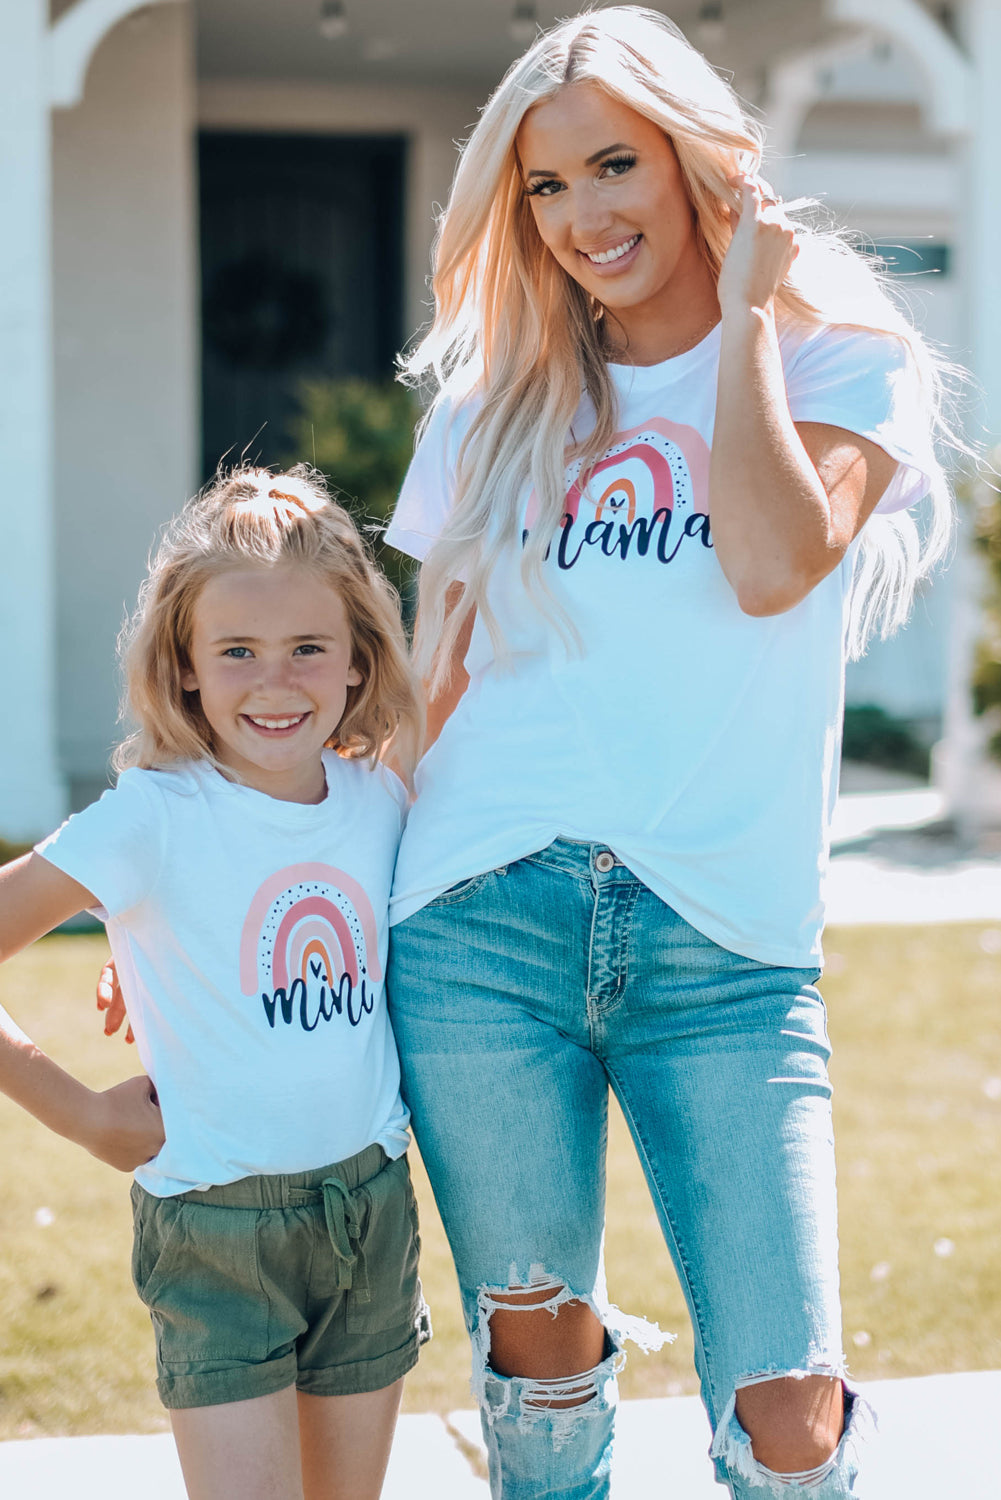 Uylee’s Boutique Women Graphic Round Neck Tee Shirt (Mommy and Me Shirt)